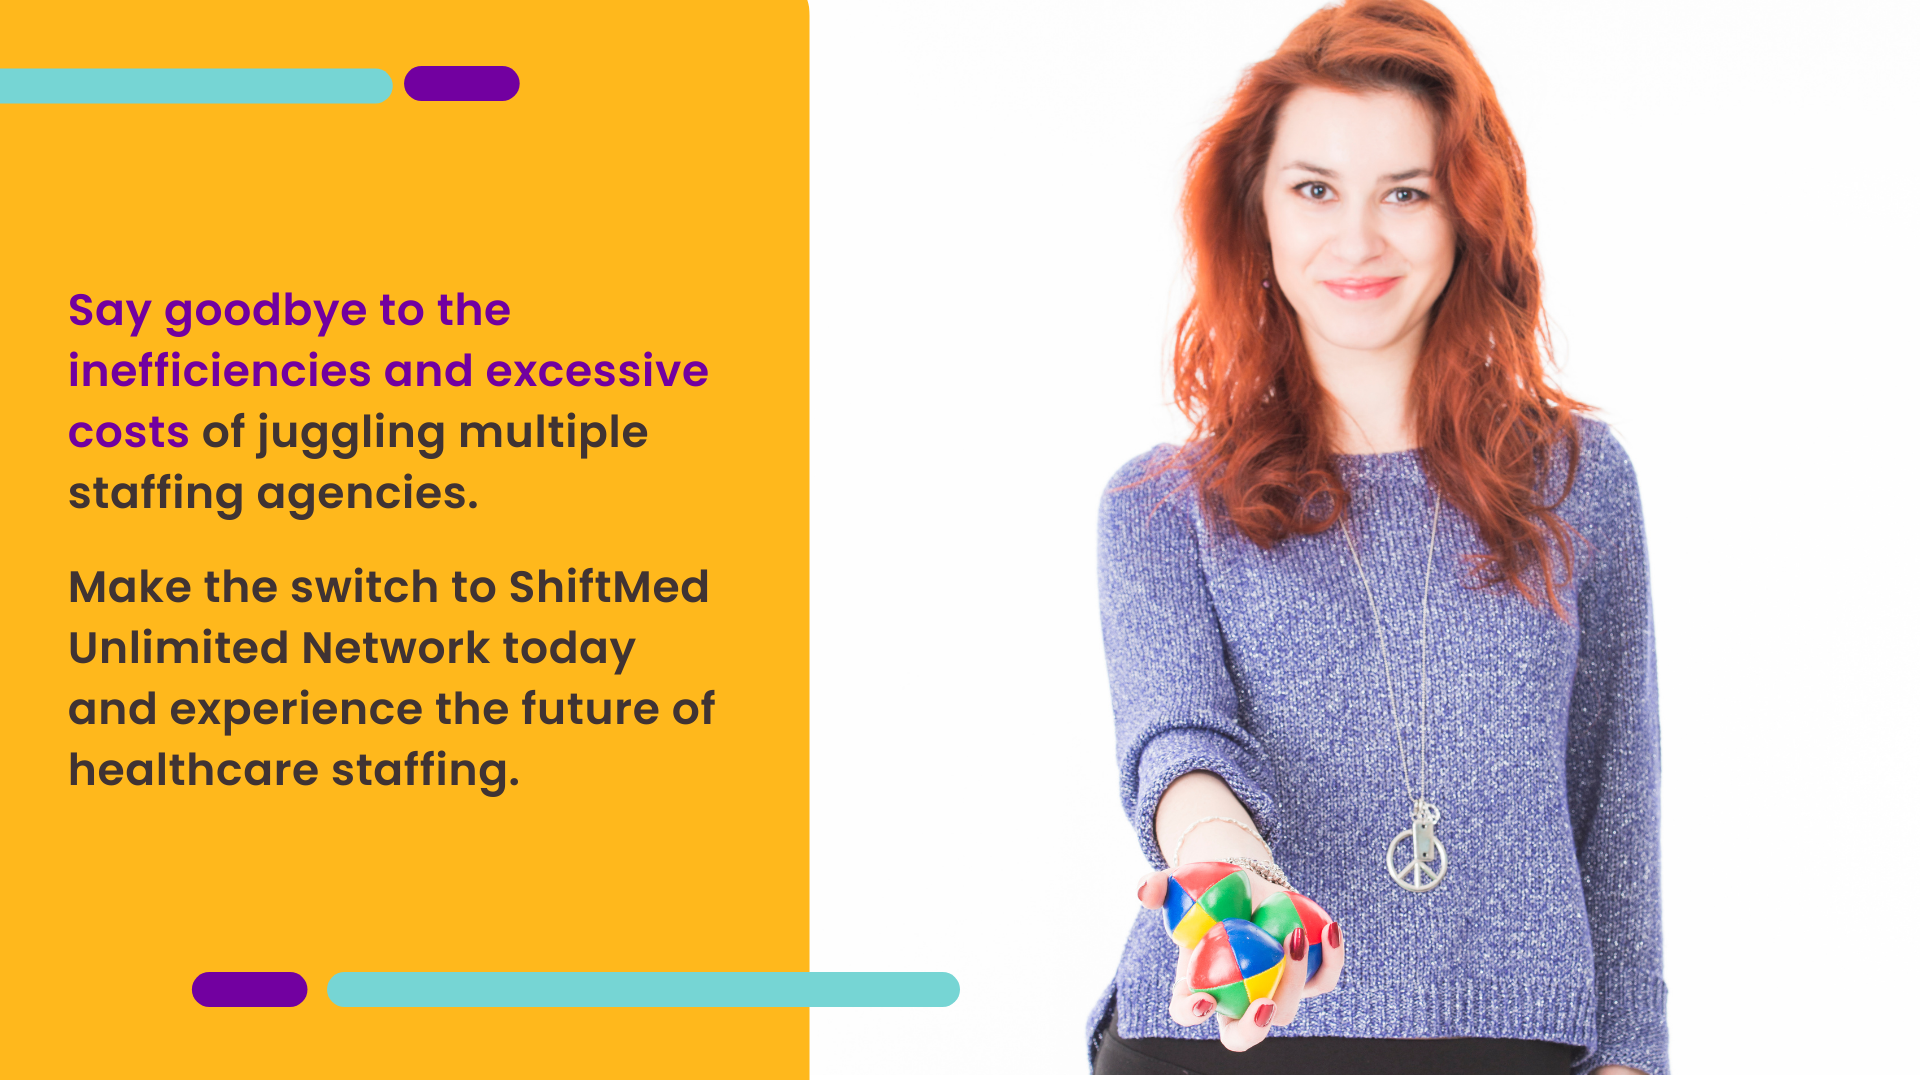 A photo of a woman who stopped juggling and is handing back three colorful balls with the text: Say goodbye to the inefficiencies and excessive costs of juggling multiple staffing agencies. Make the switch to ShiftMed Unlimited Network today.